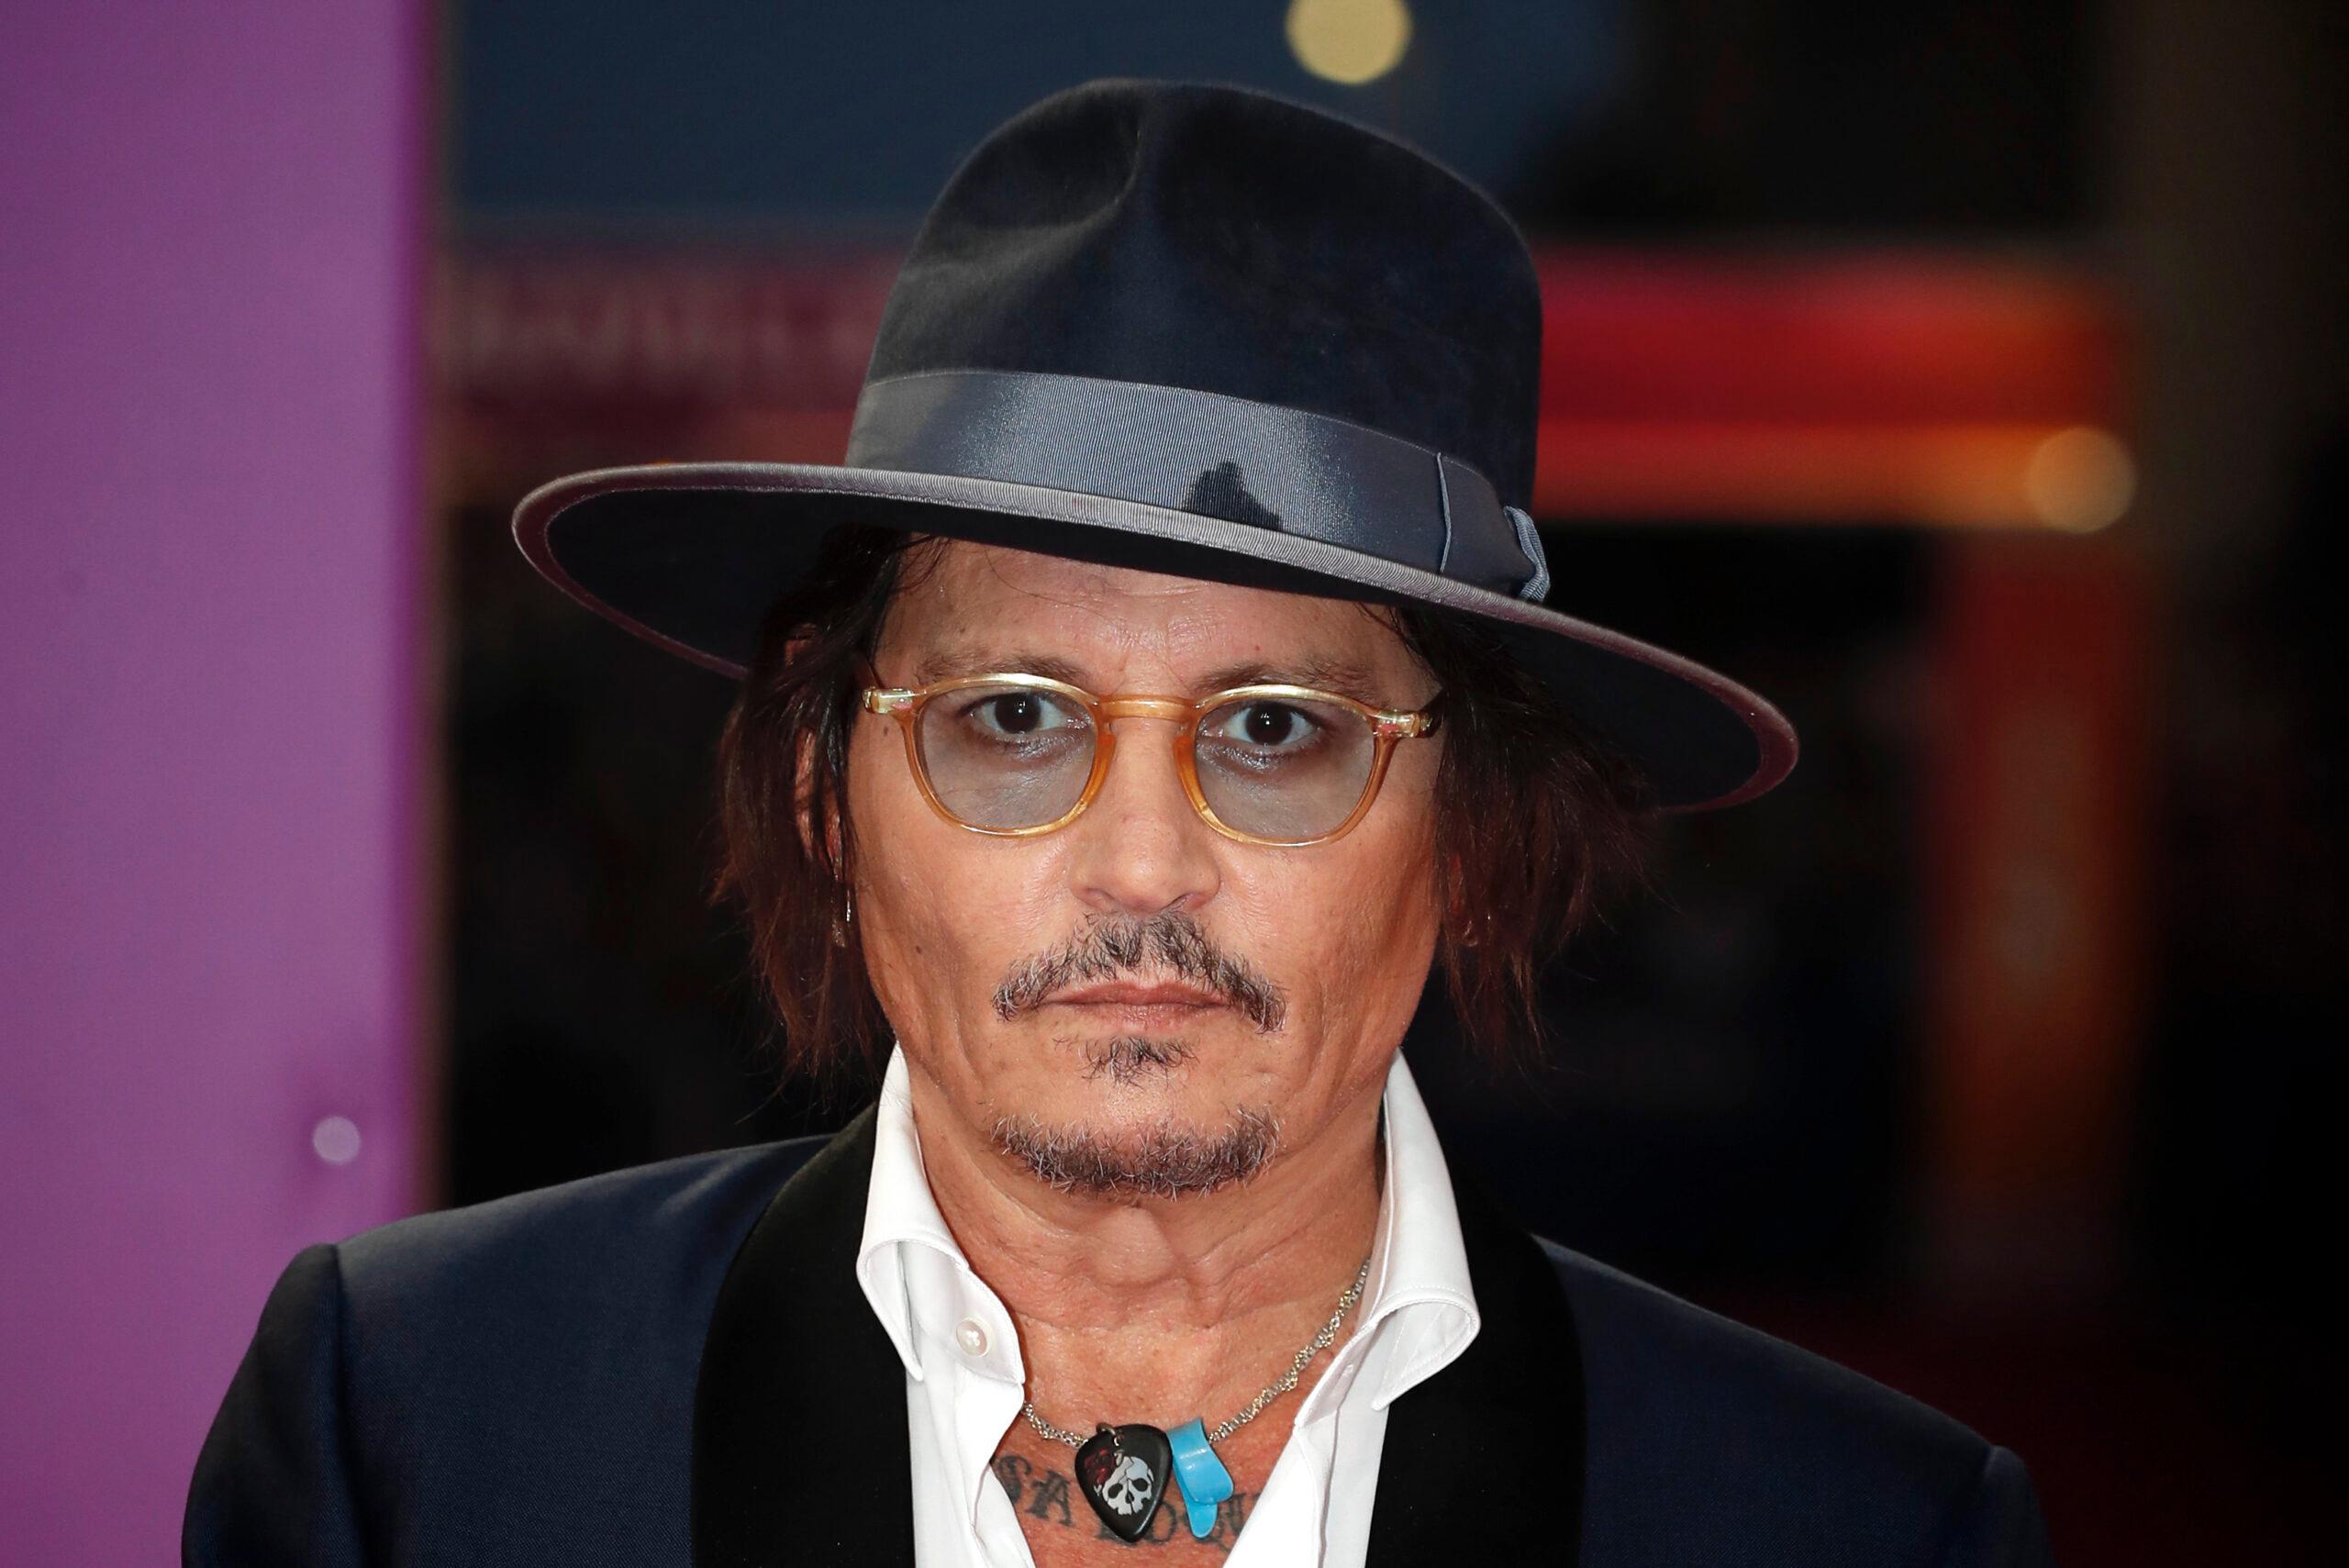 Johnny Depp attends The 47th Deauville American Film Festival